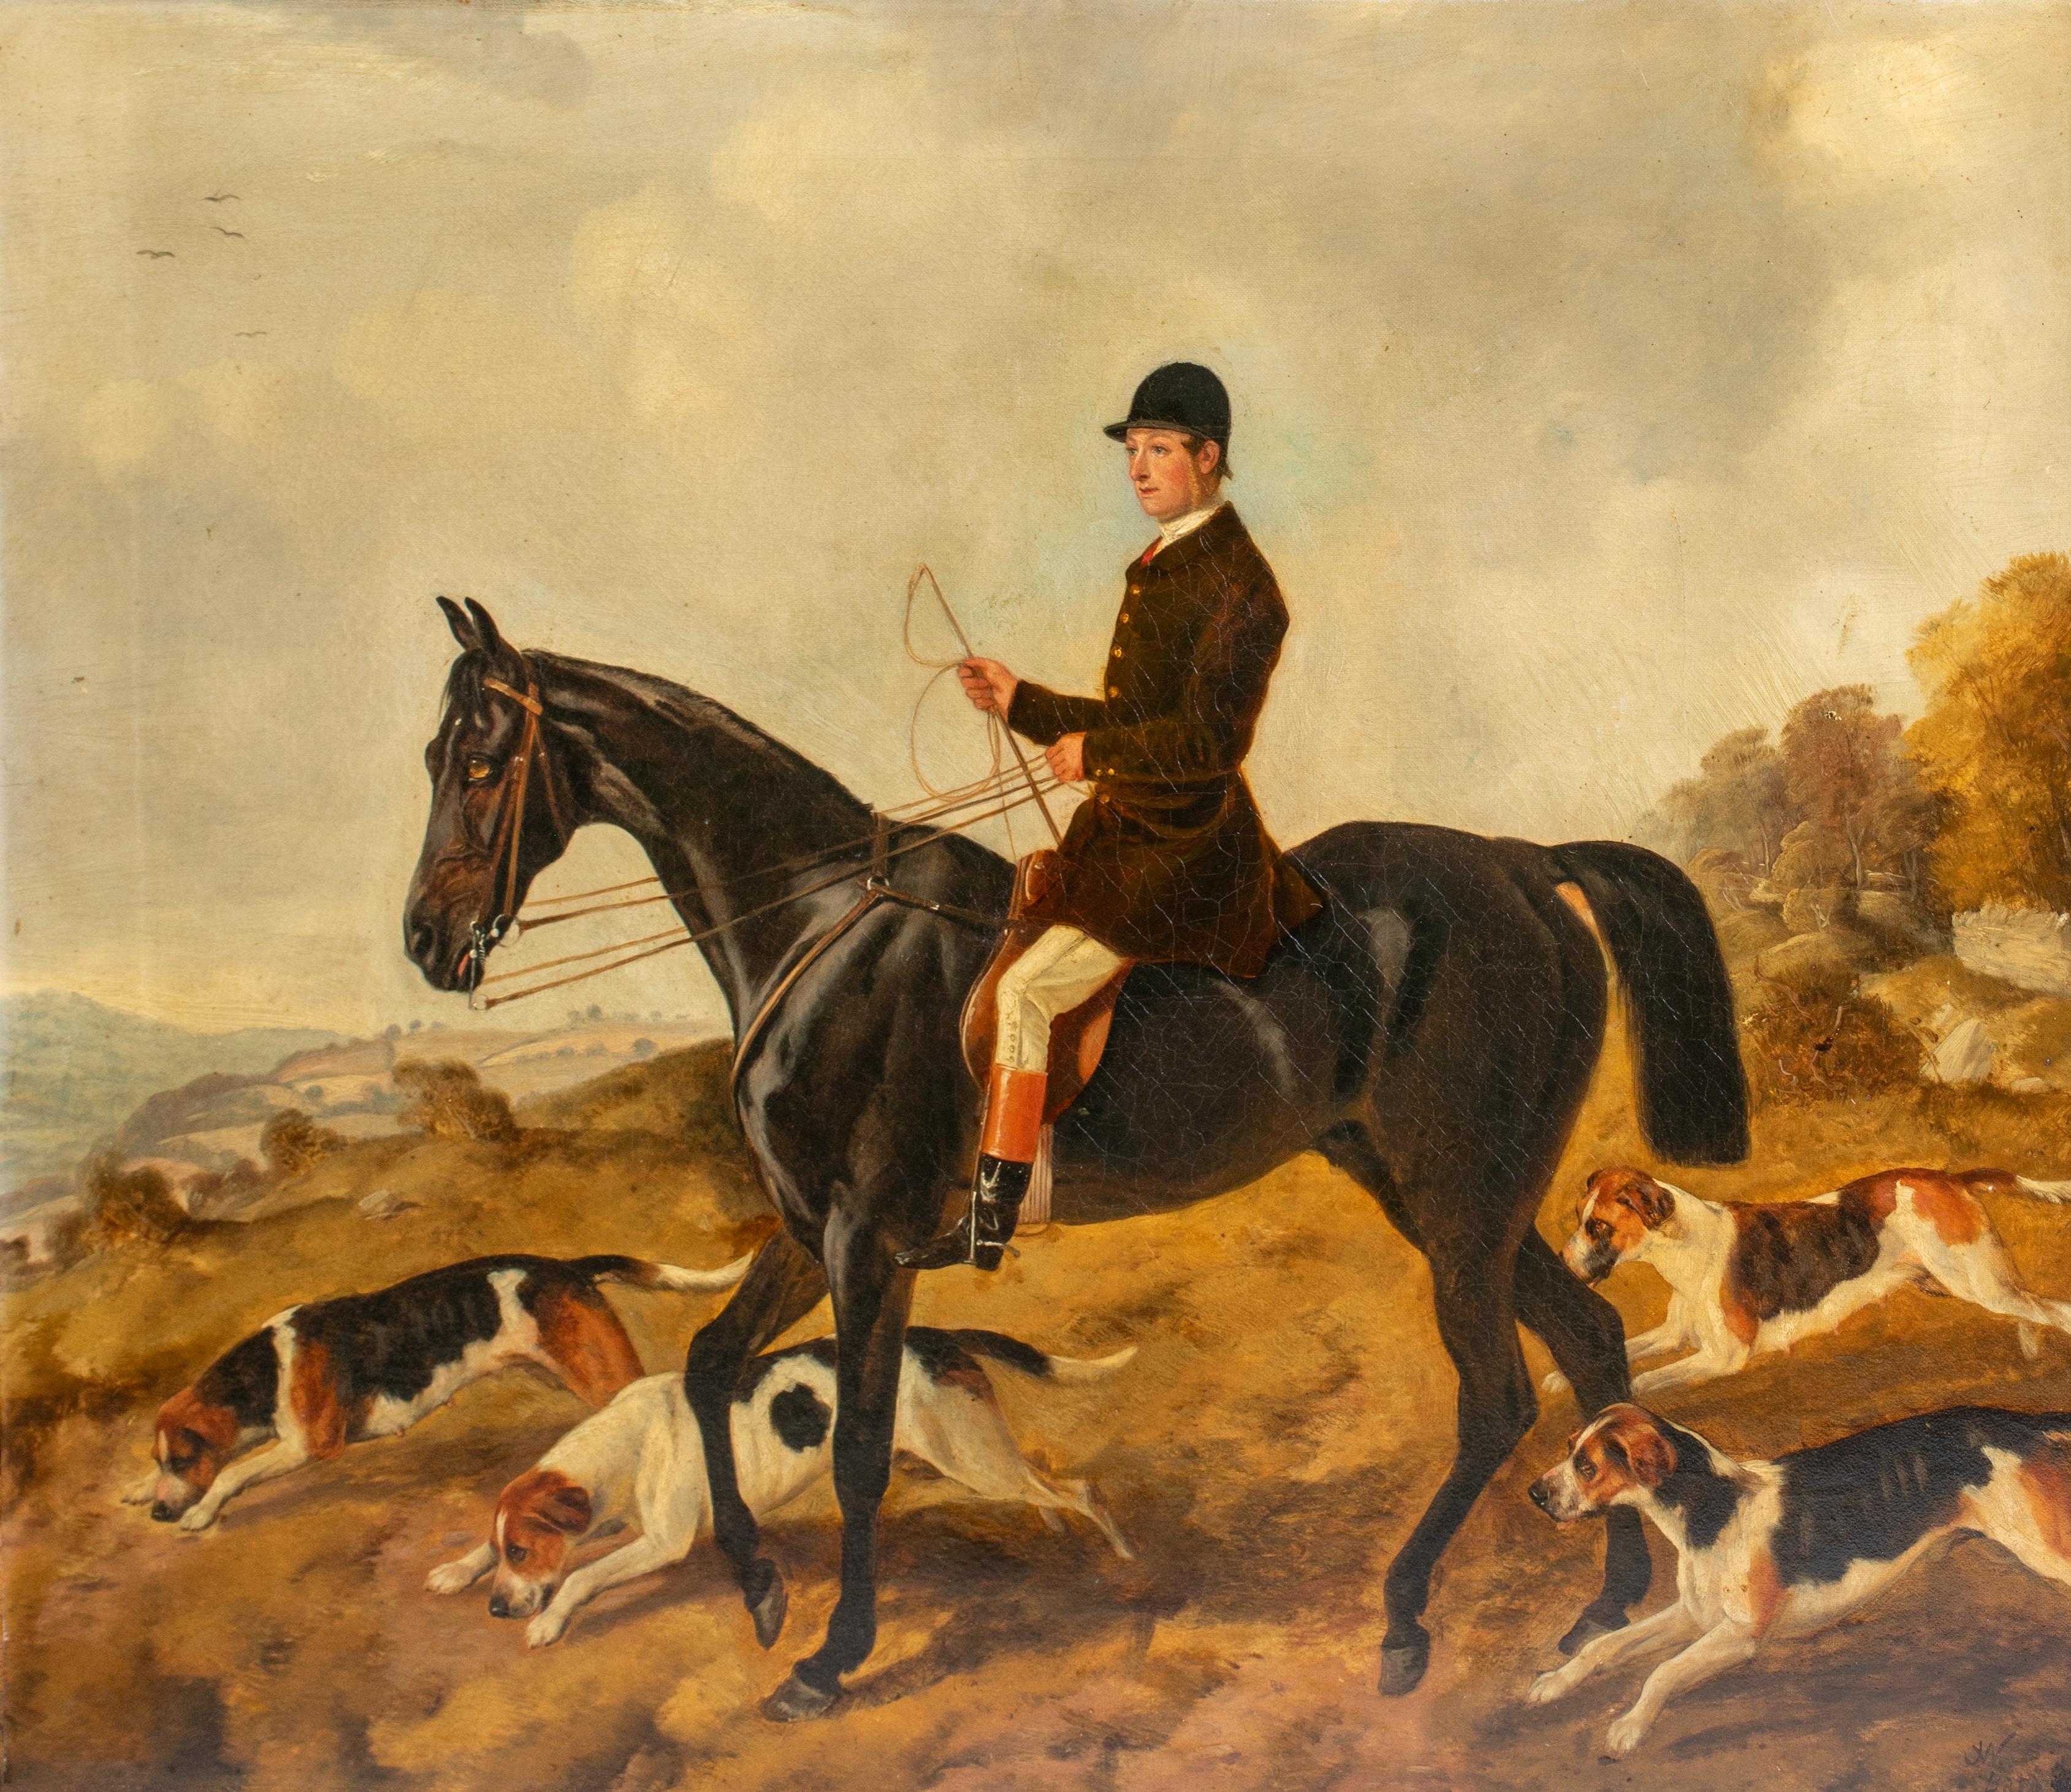 Portrait Of John West On Viscount Howard with the Foxhounds, 19th Century

by John Alfred Wheeler (1821-1903) to $40,000

Large 19th Century English hunting portrait of John West on Viscount Howard accompanied by the foxhounds, oil on canvas by John